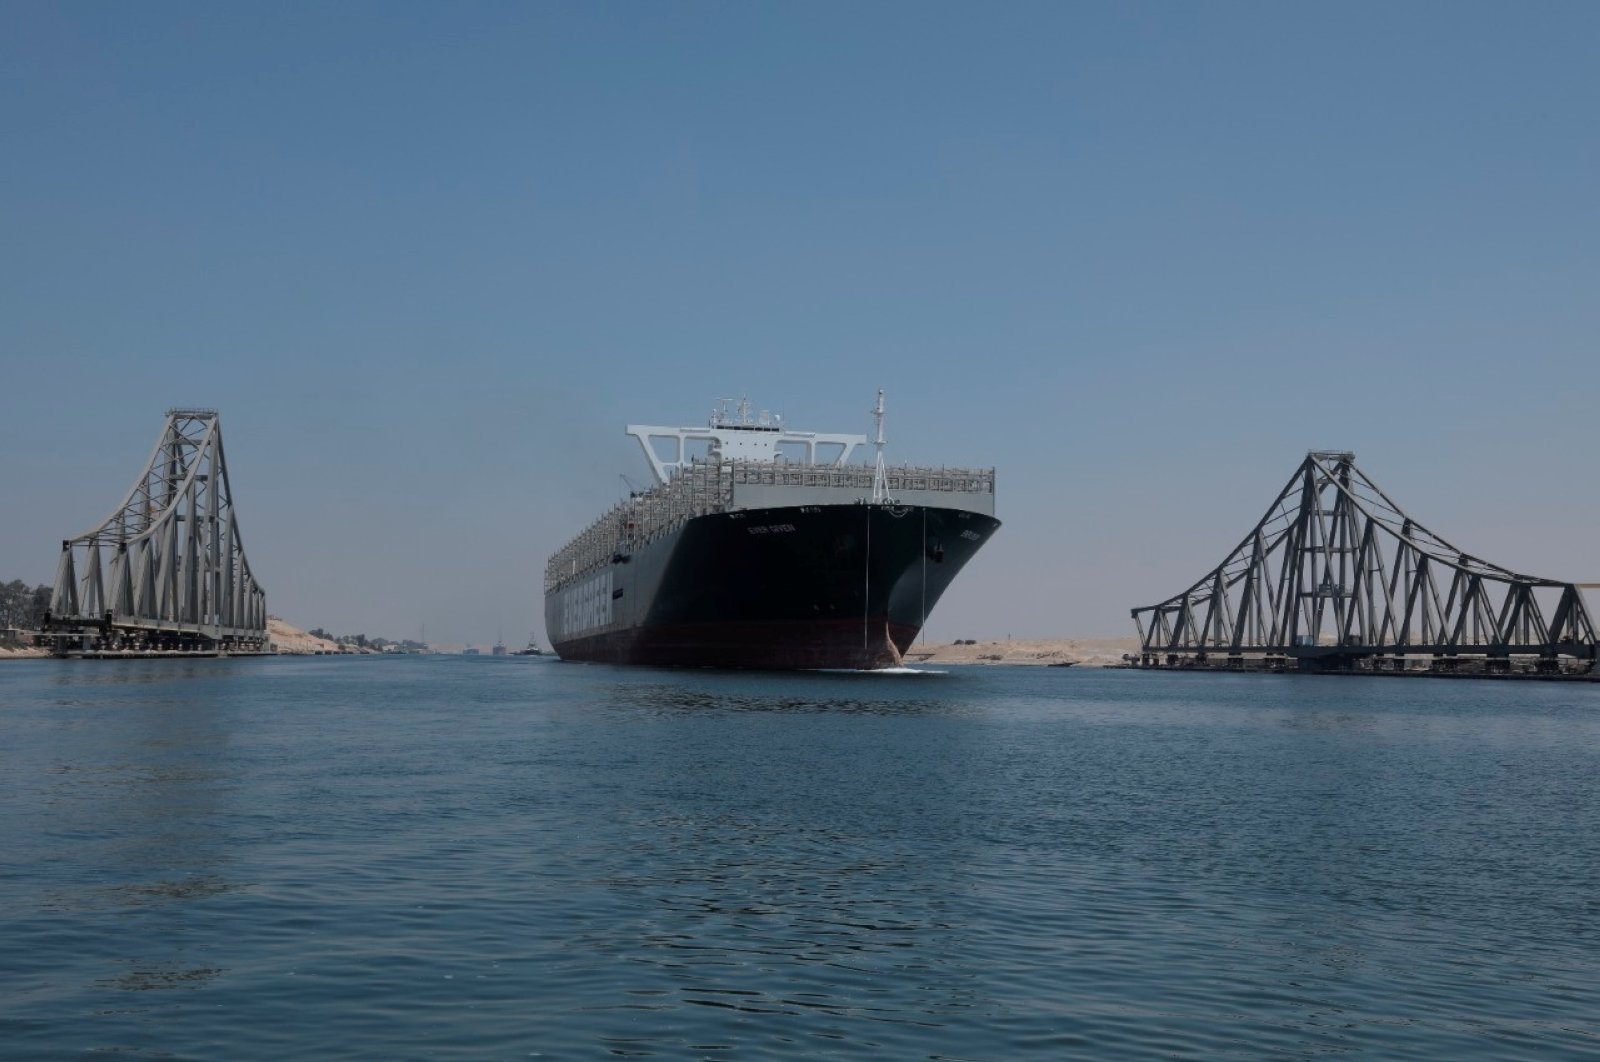 Megaship Ever Given That Caused Suez Canal Blockage Heads Home Daily Sabah